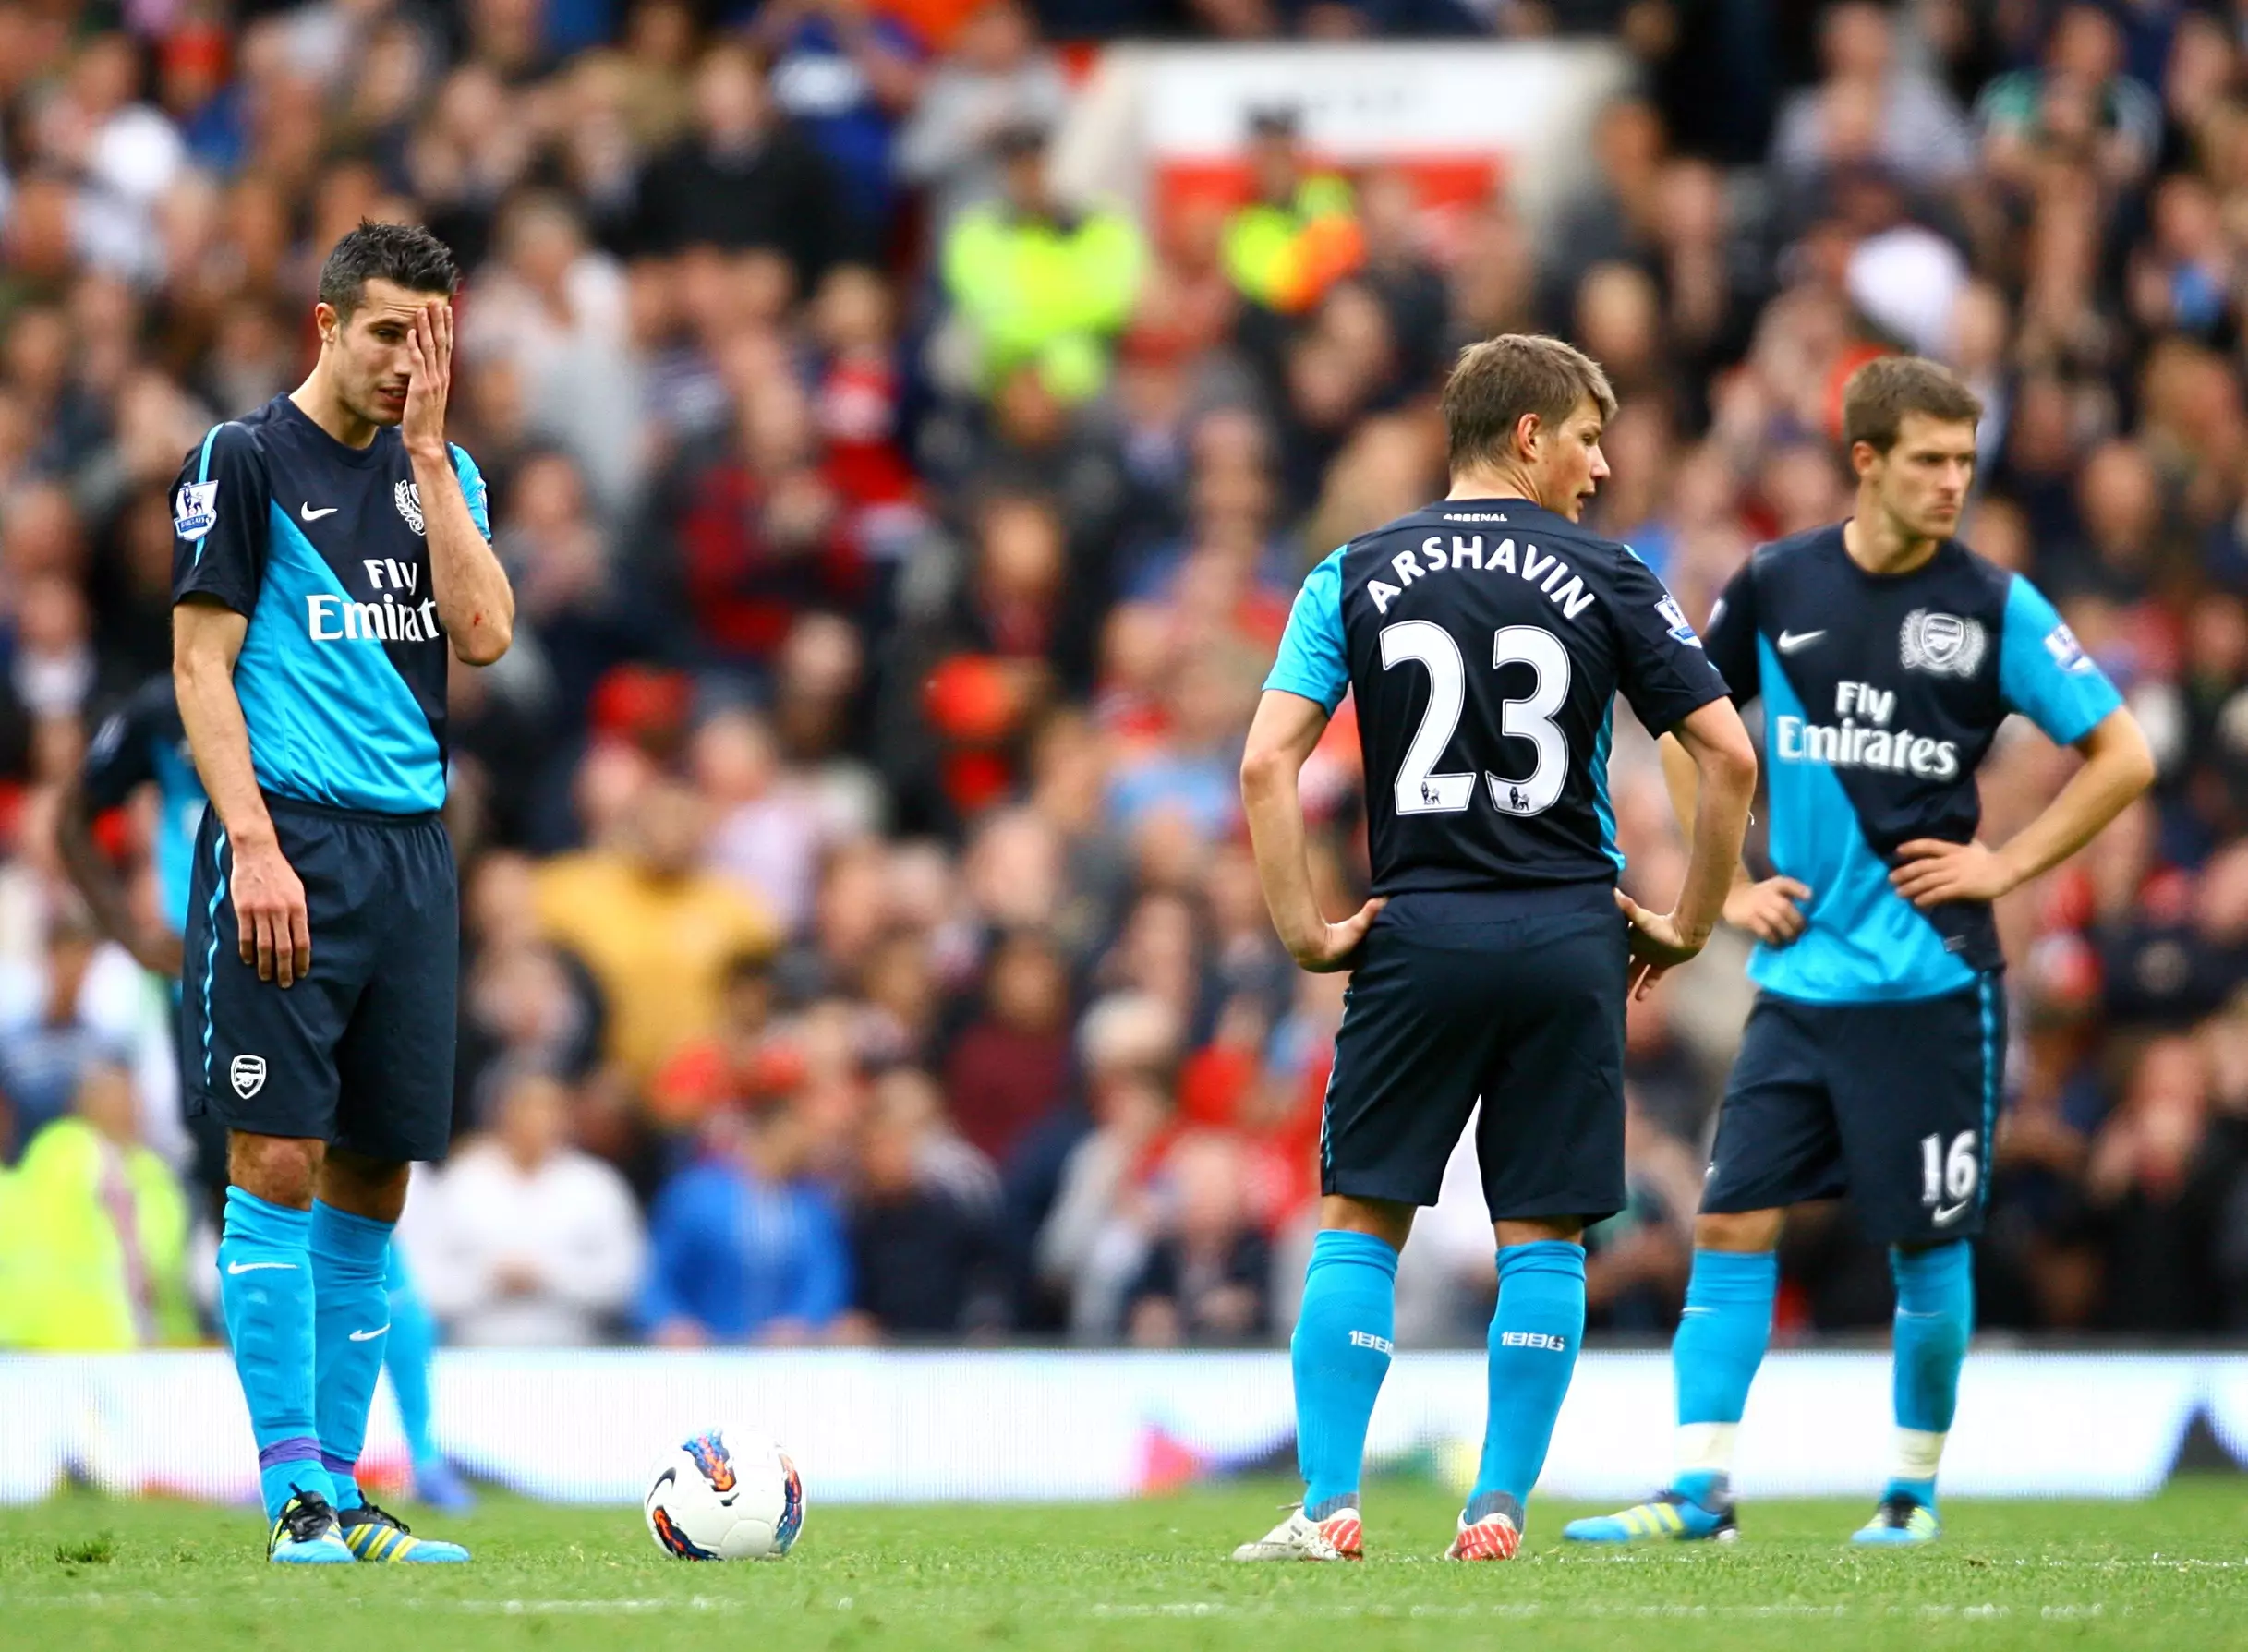 Arsenal players dejected during the famous loss. Image: PA Images